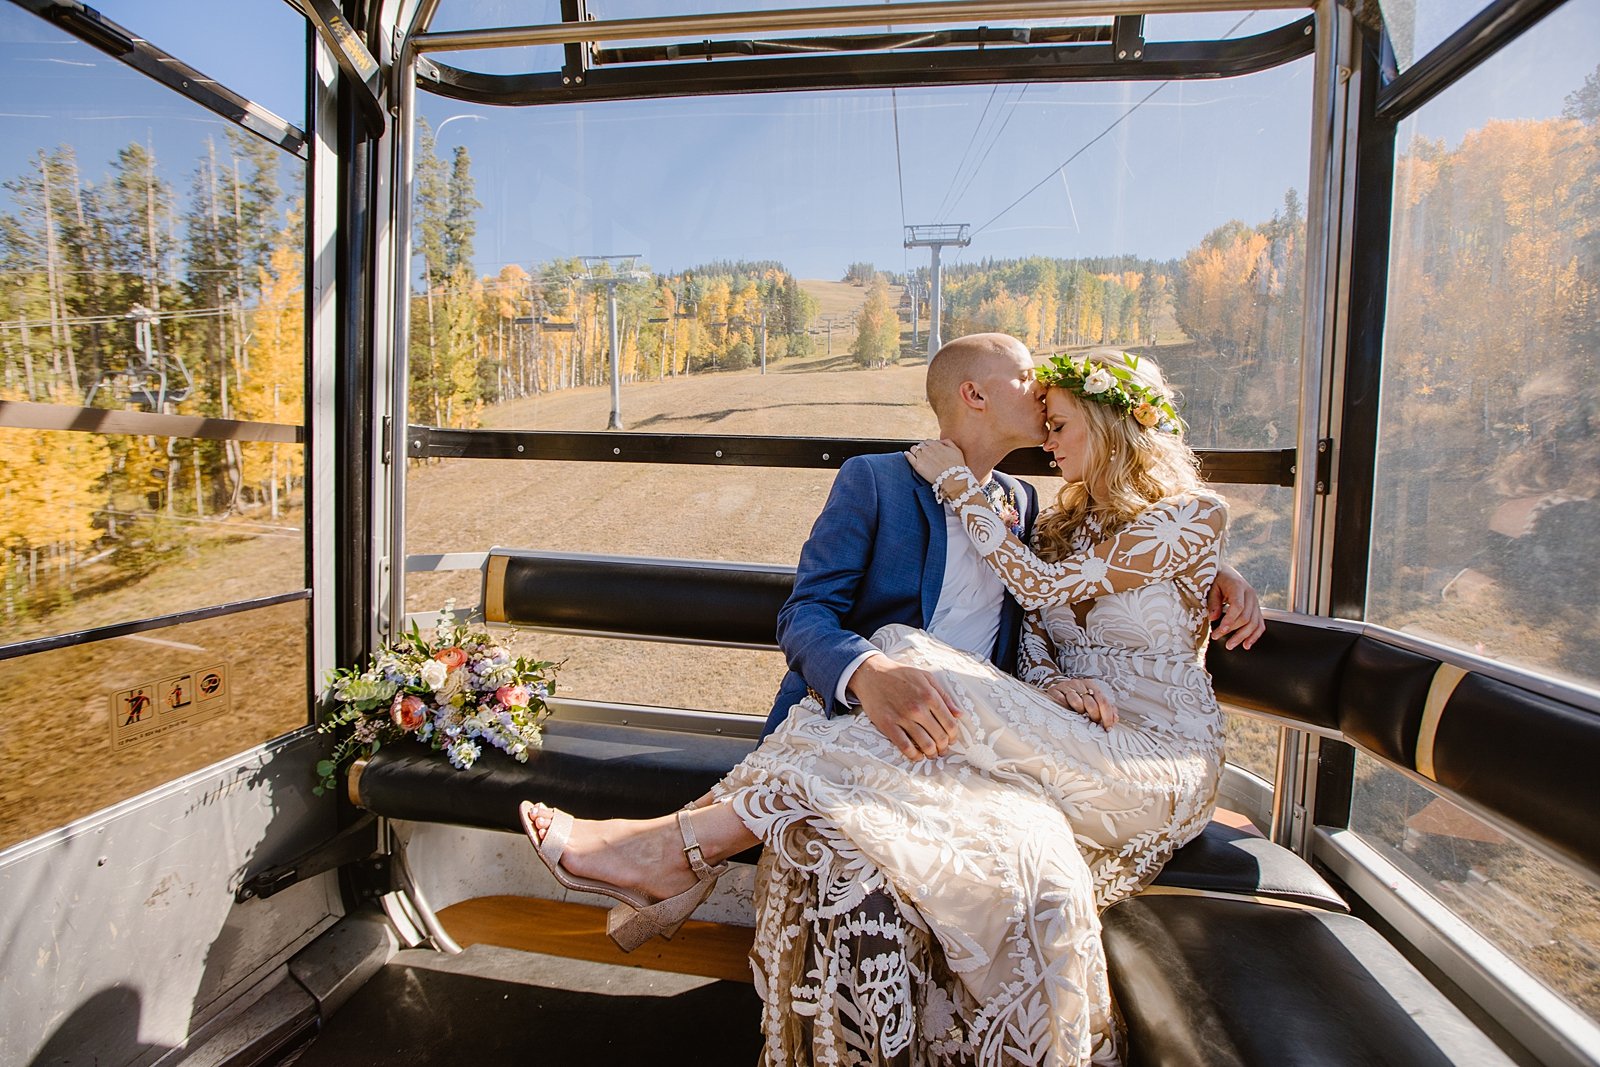 bride and groom riding in the gondola, breckenridge resort wedding, breckenridge gondola ride, ski gondola, wedding in a gondola, bridal portraits at a ski resort, lace wedding dress